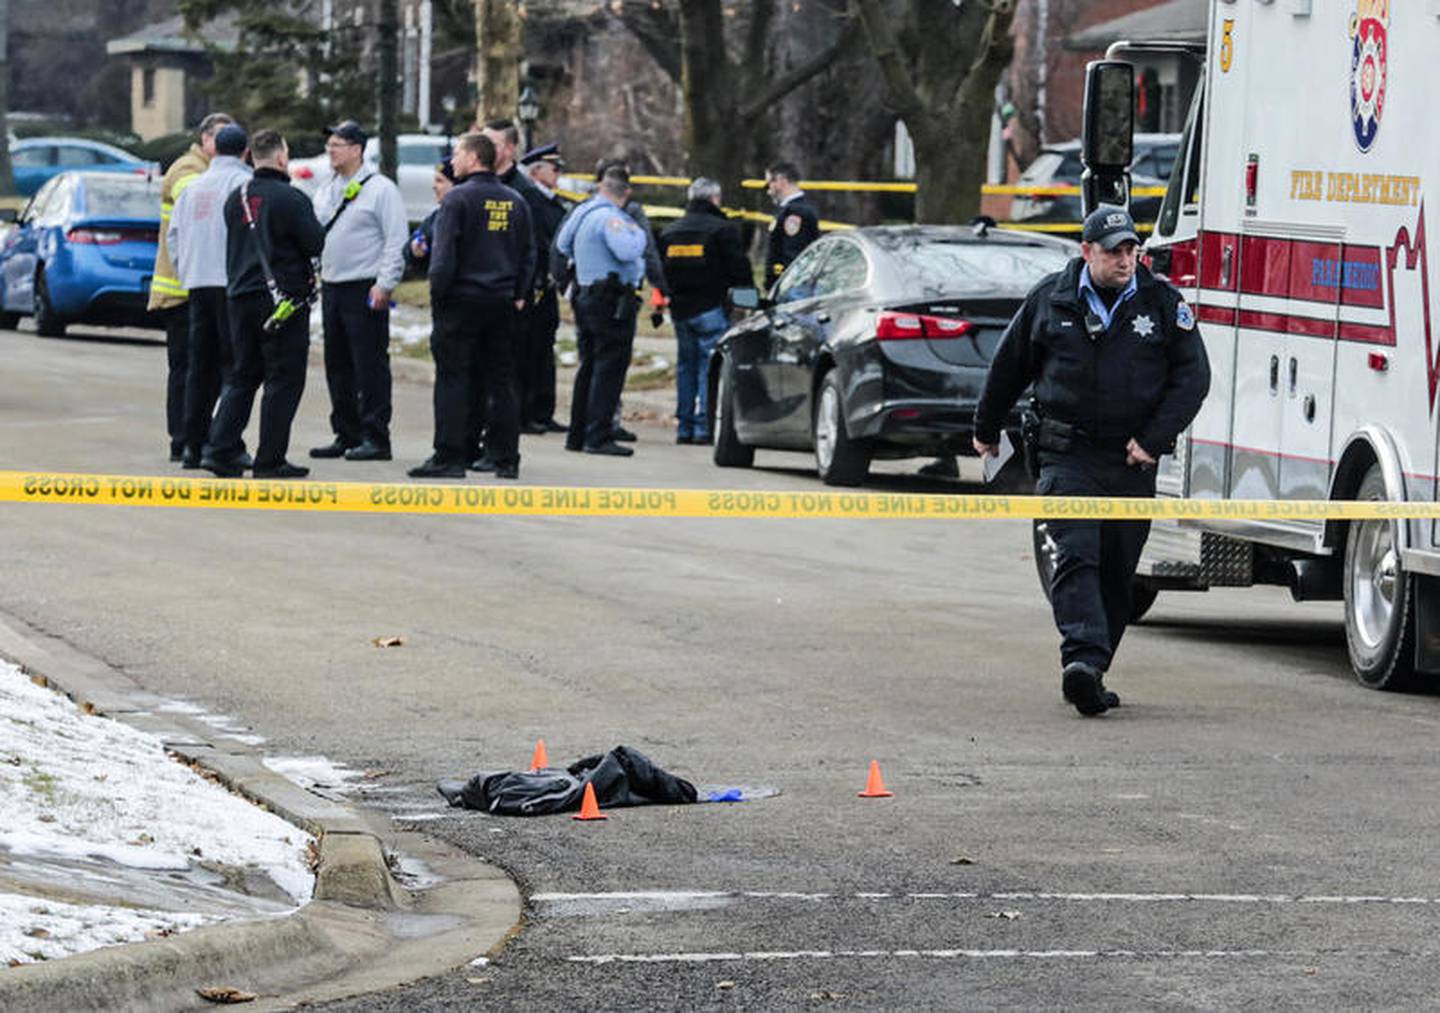 a jacket can be seen on the ground as police and investigators secure the scene of a shooting Friday, Dec. 20, 2019, at Sherwood Place in Joliet, Ill. One male was killed and a female was transported to an area hospital with an injury.